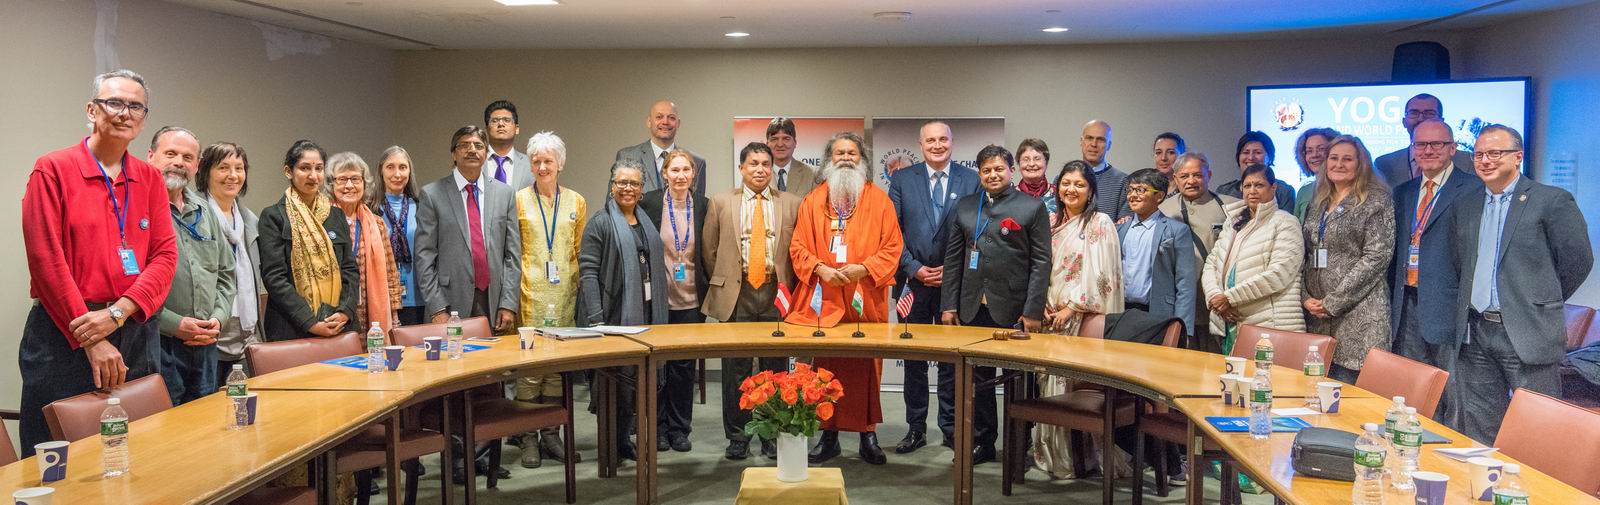 Yoga and World Peace conference 6